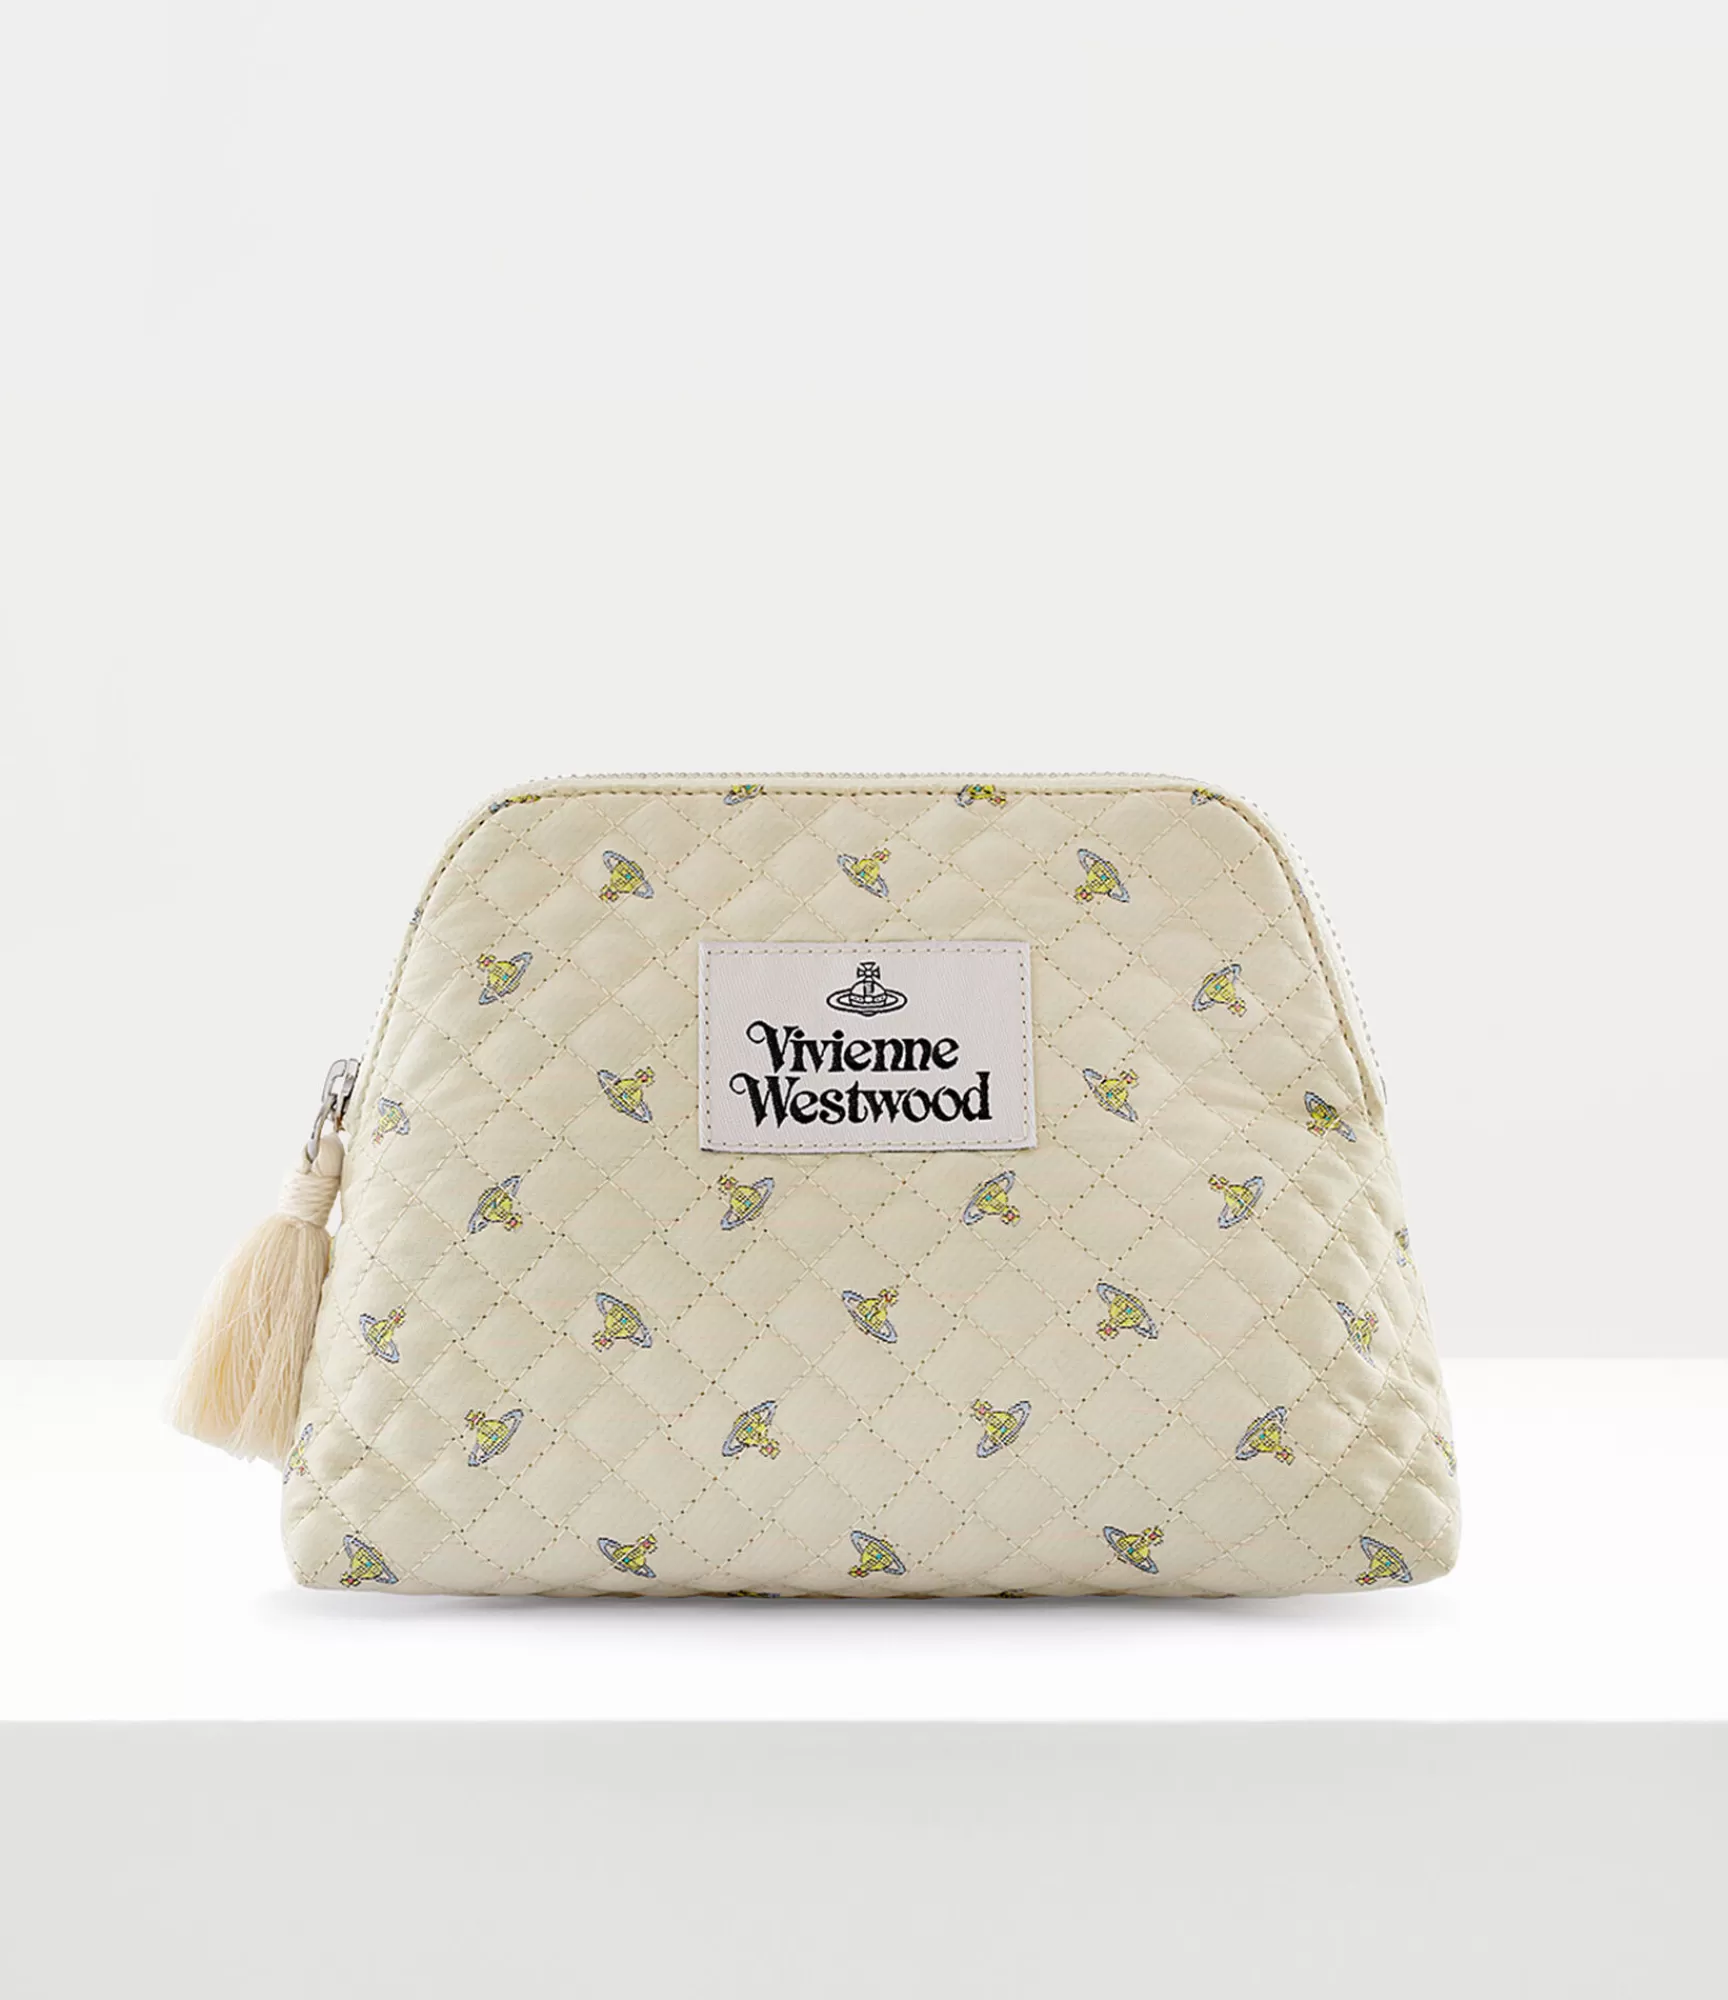 Vivienne Westwood Other Accessories*Small wash bag Beige Multi